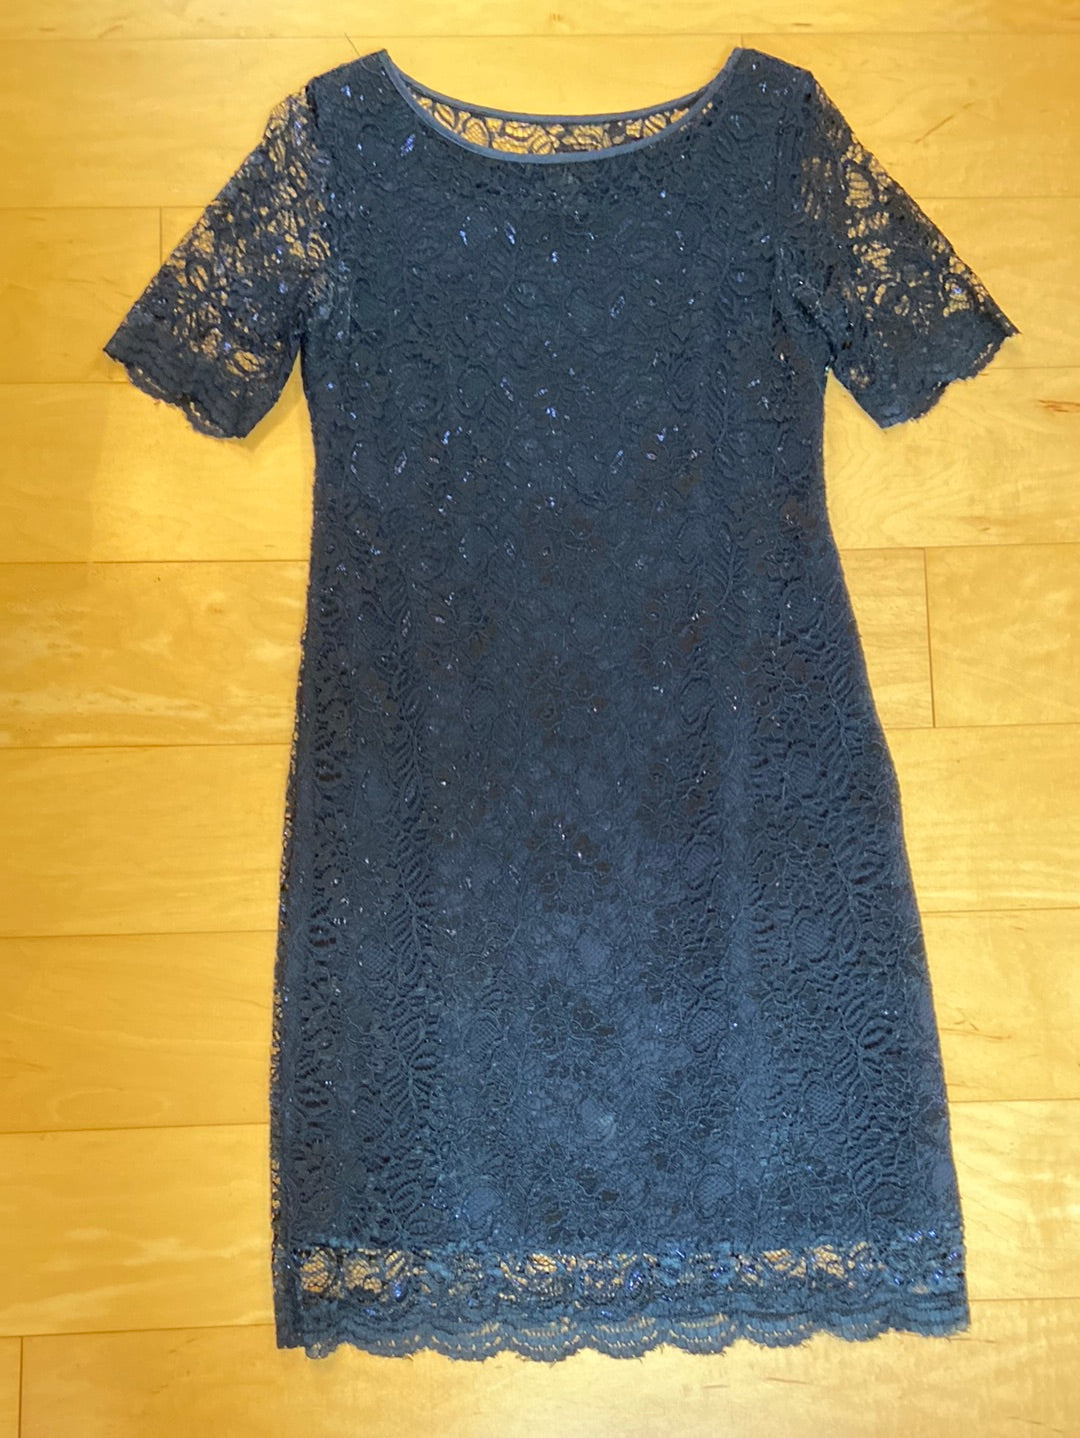 Navy blue short sleeve dress with rayon lace throughout the dress, knee length, crew neck, sheer sleeves